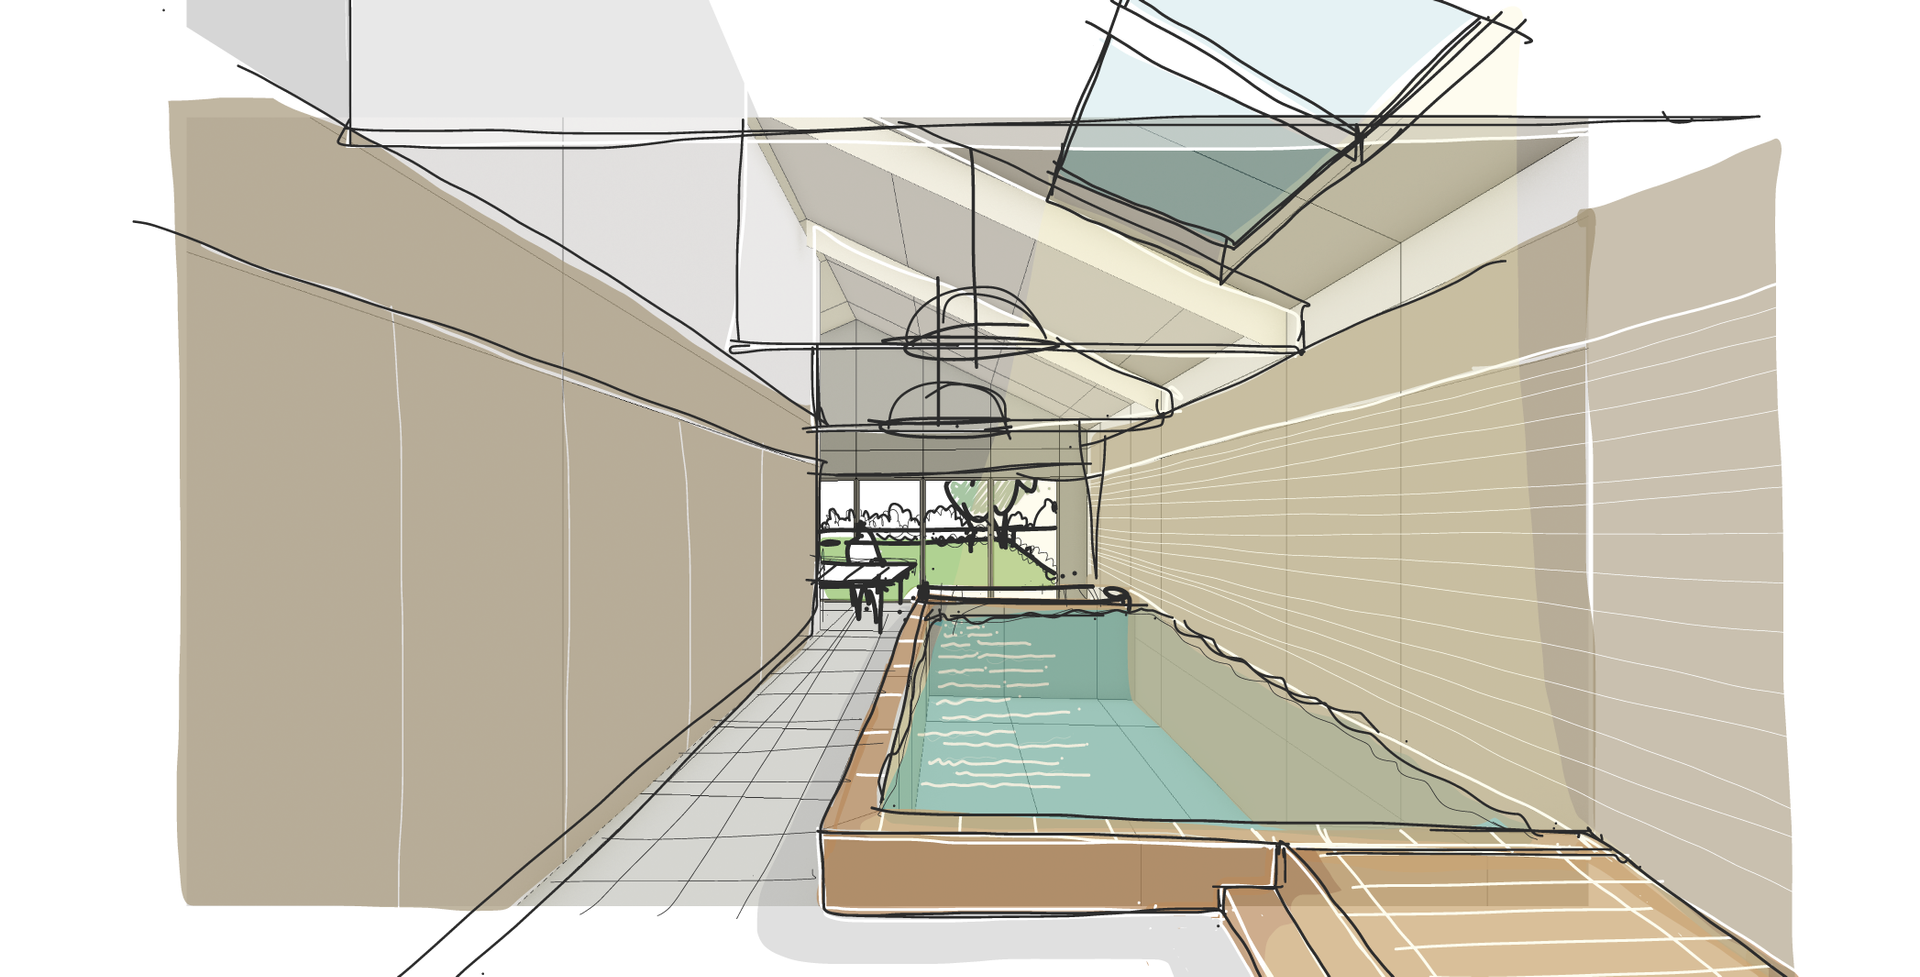 Design of an accessible swimming pool